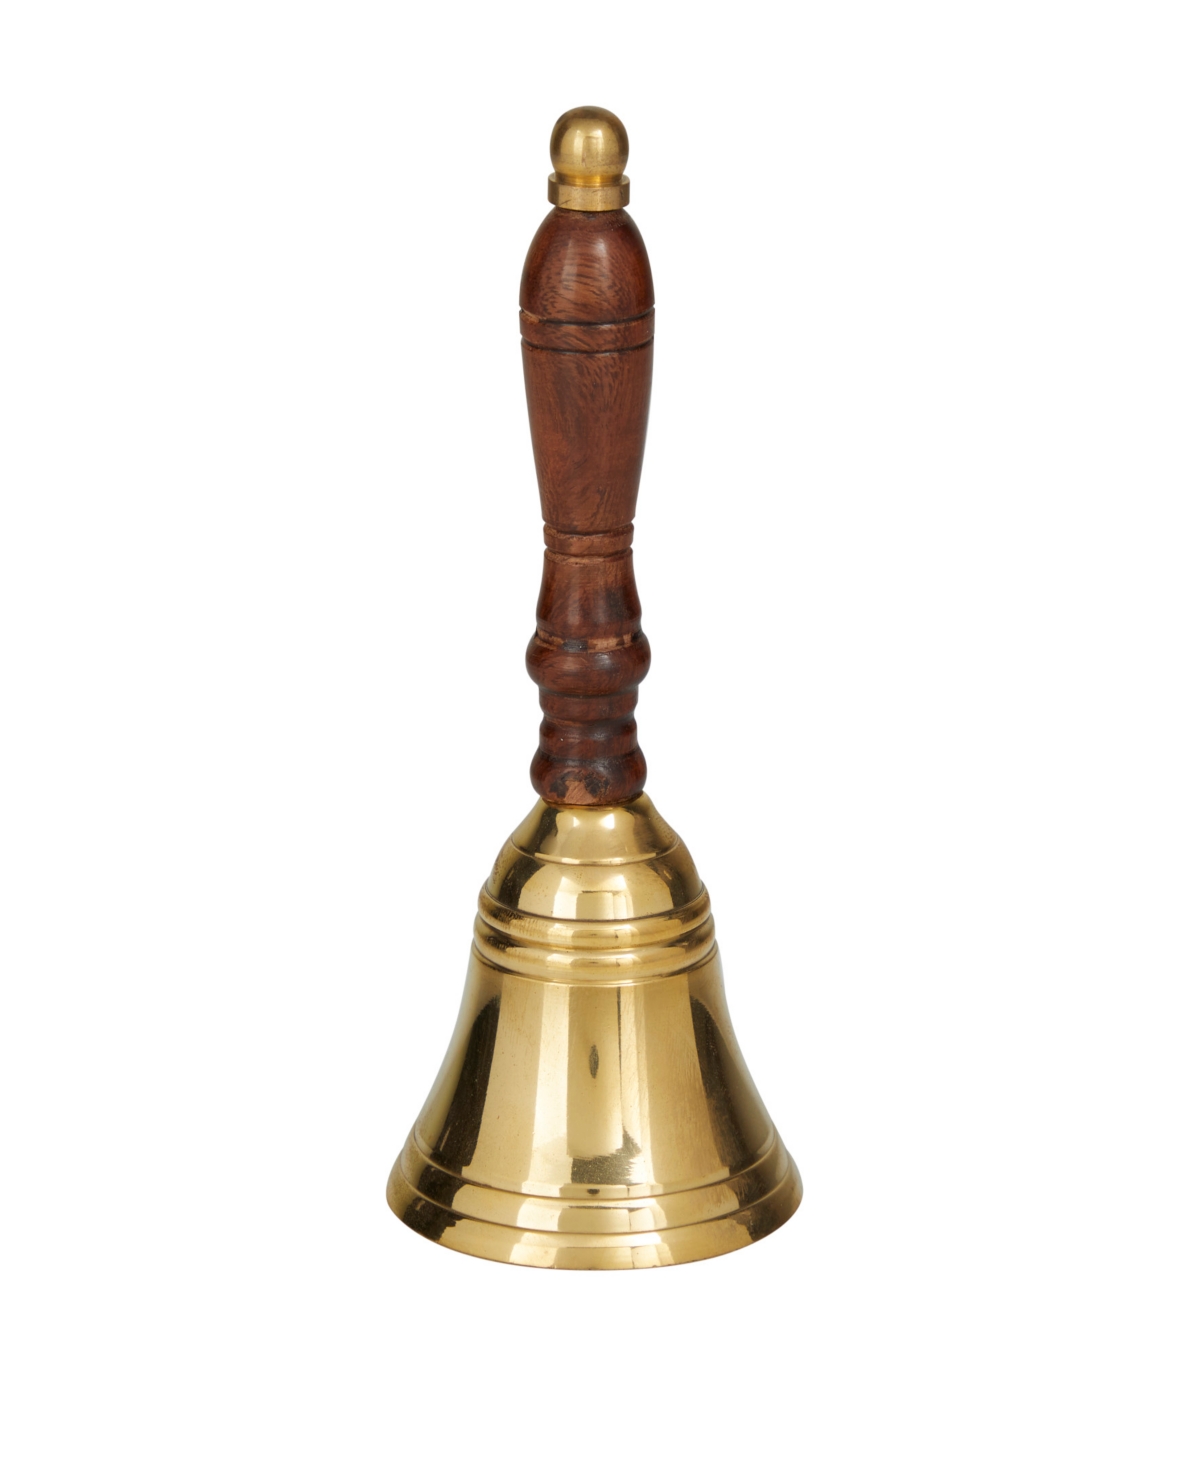 Rosemary Lane Brass Decorative Bell, 2" X 2" X 5" In Gold